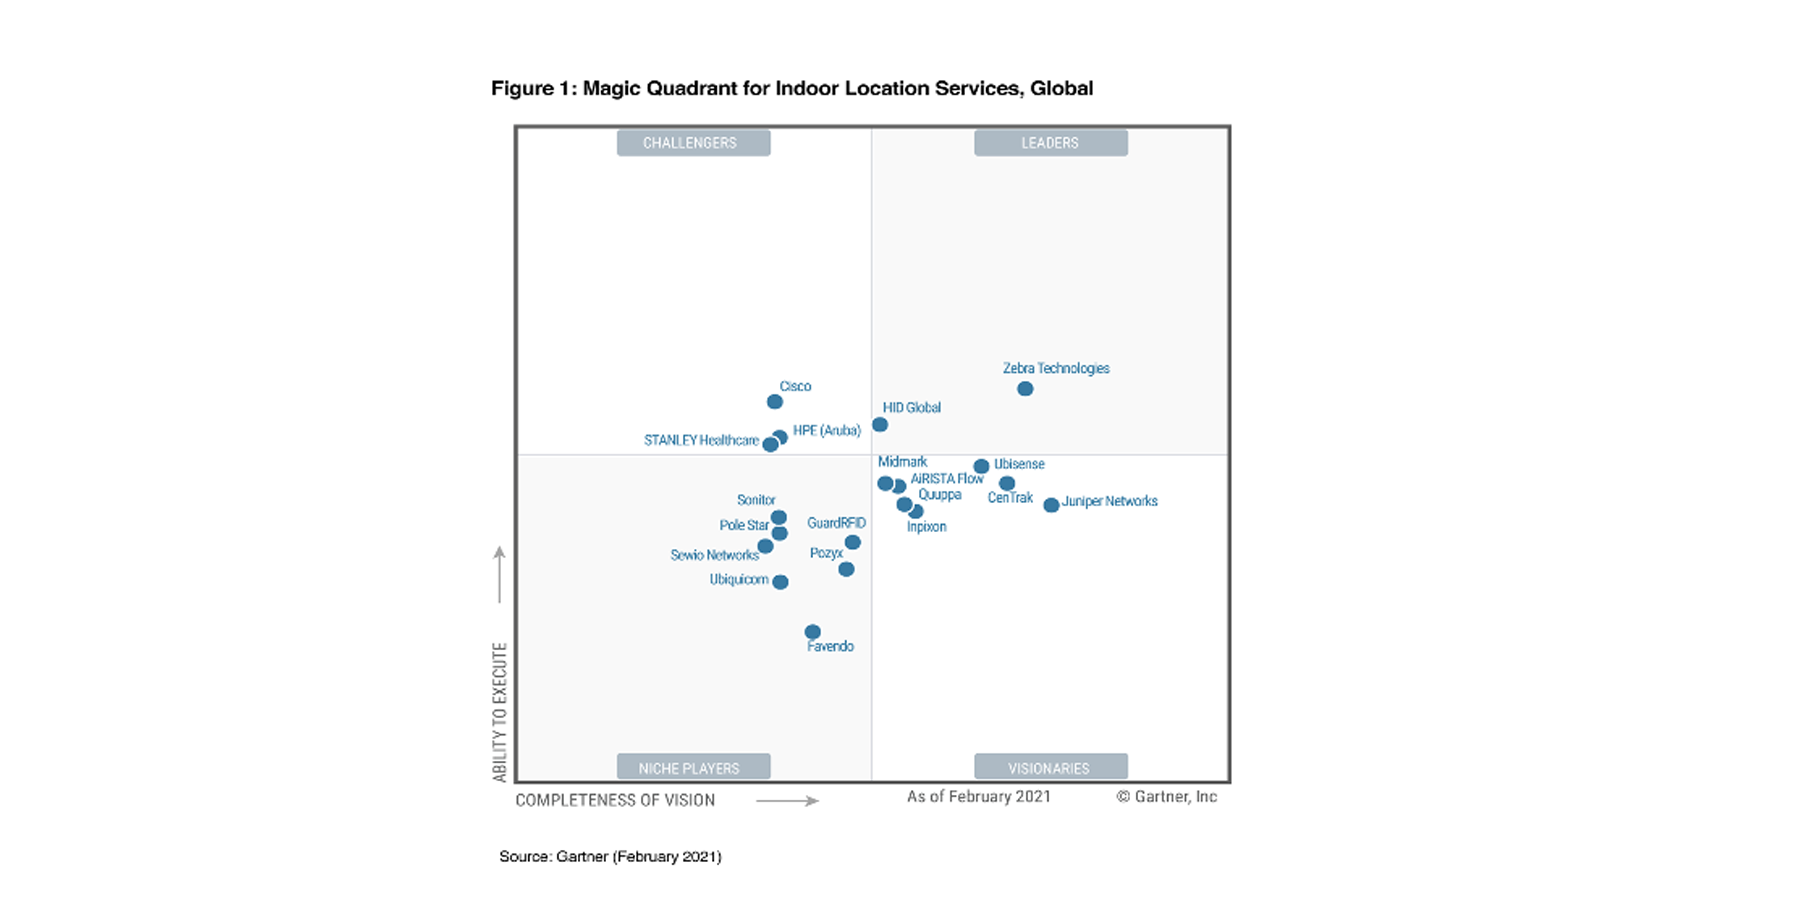 Juniper Networks Recognized as the Furthest in Completeness of Vision in the 2021 Gartner Magic Quadrant for Indoor Location Services, Global